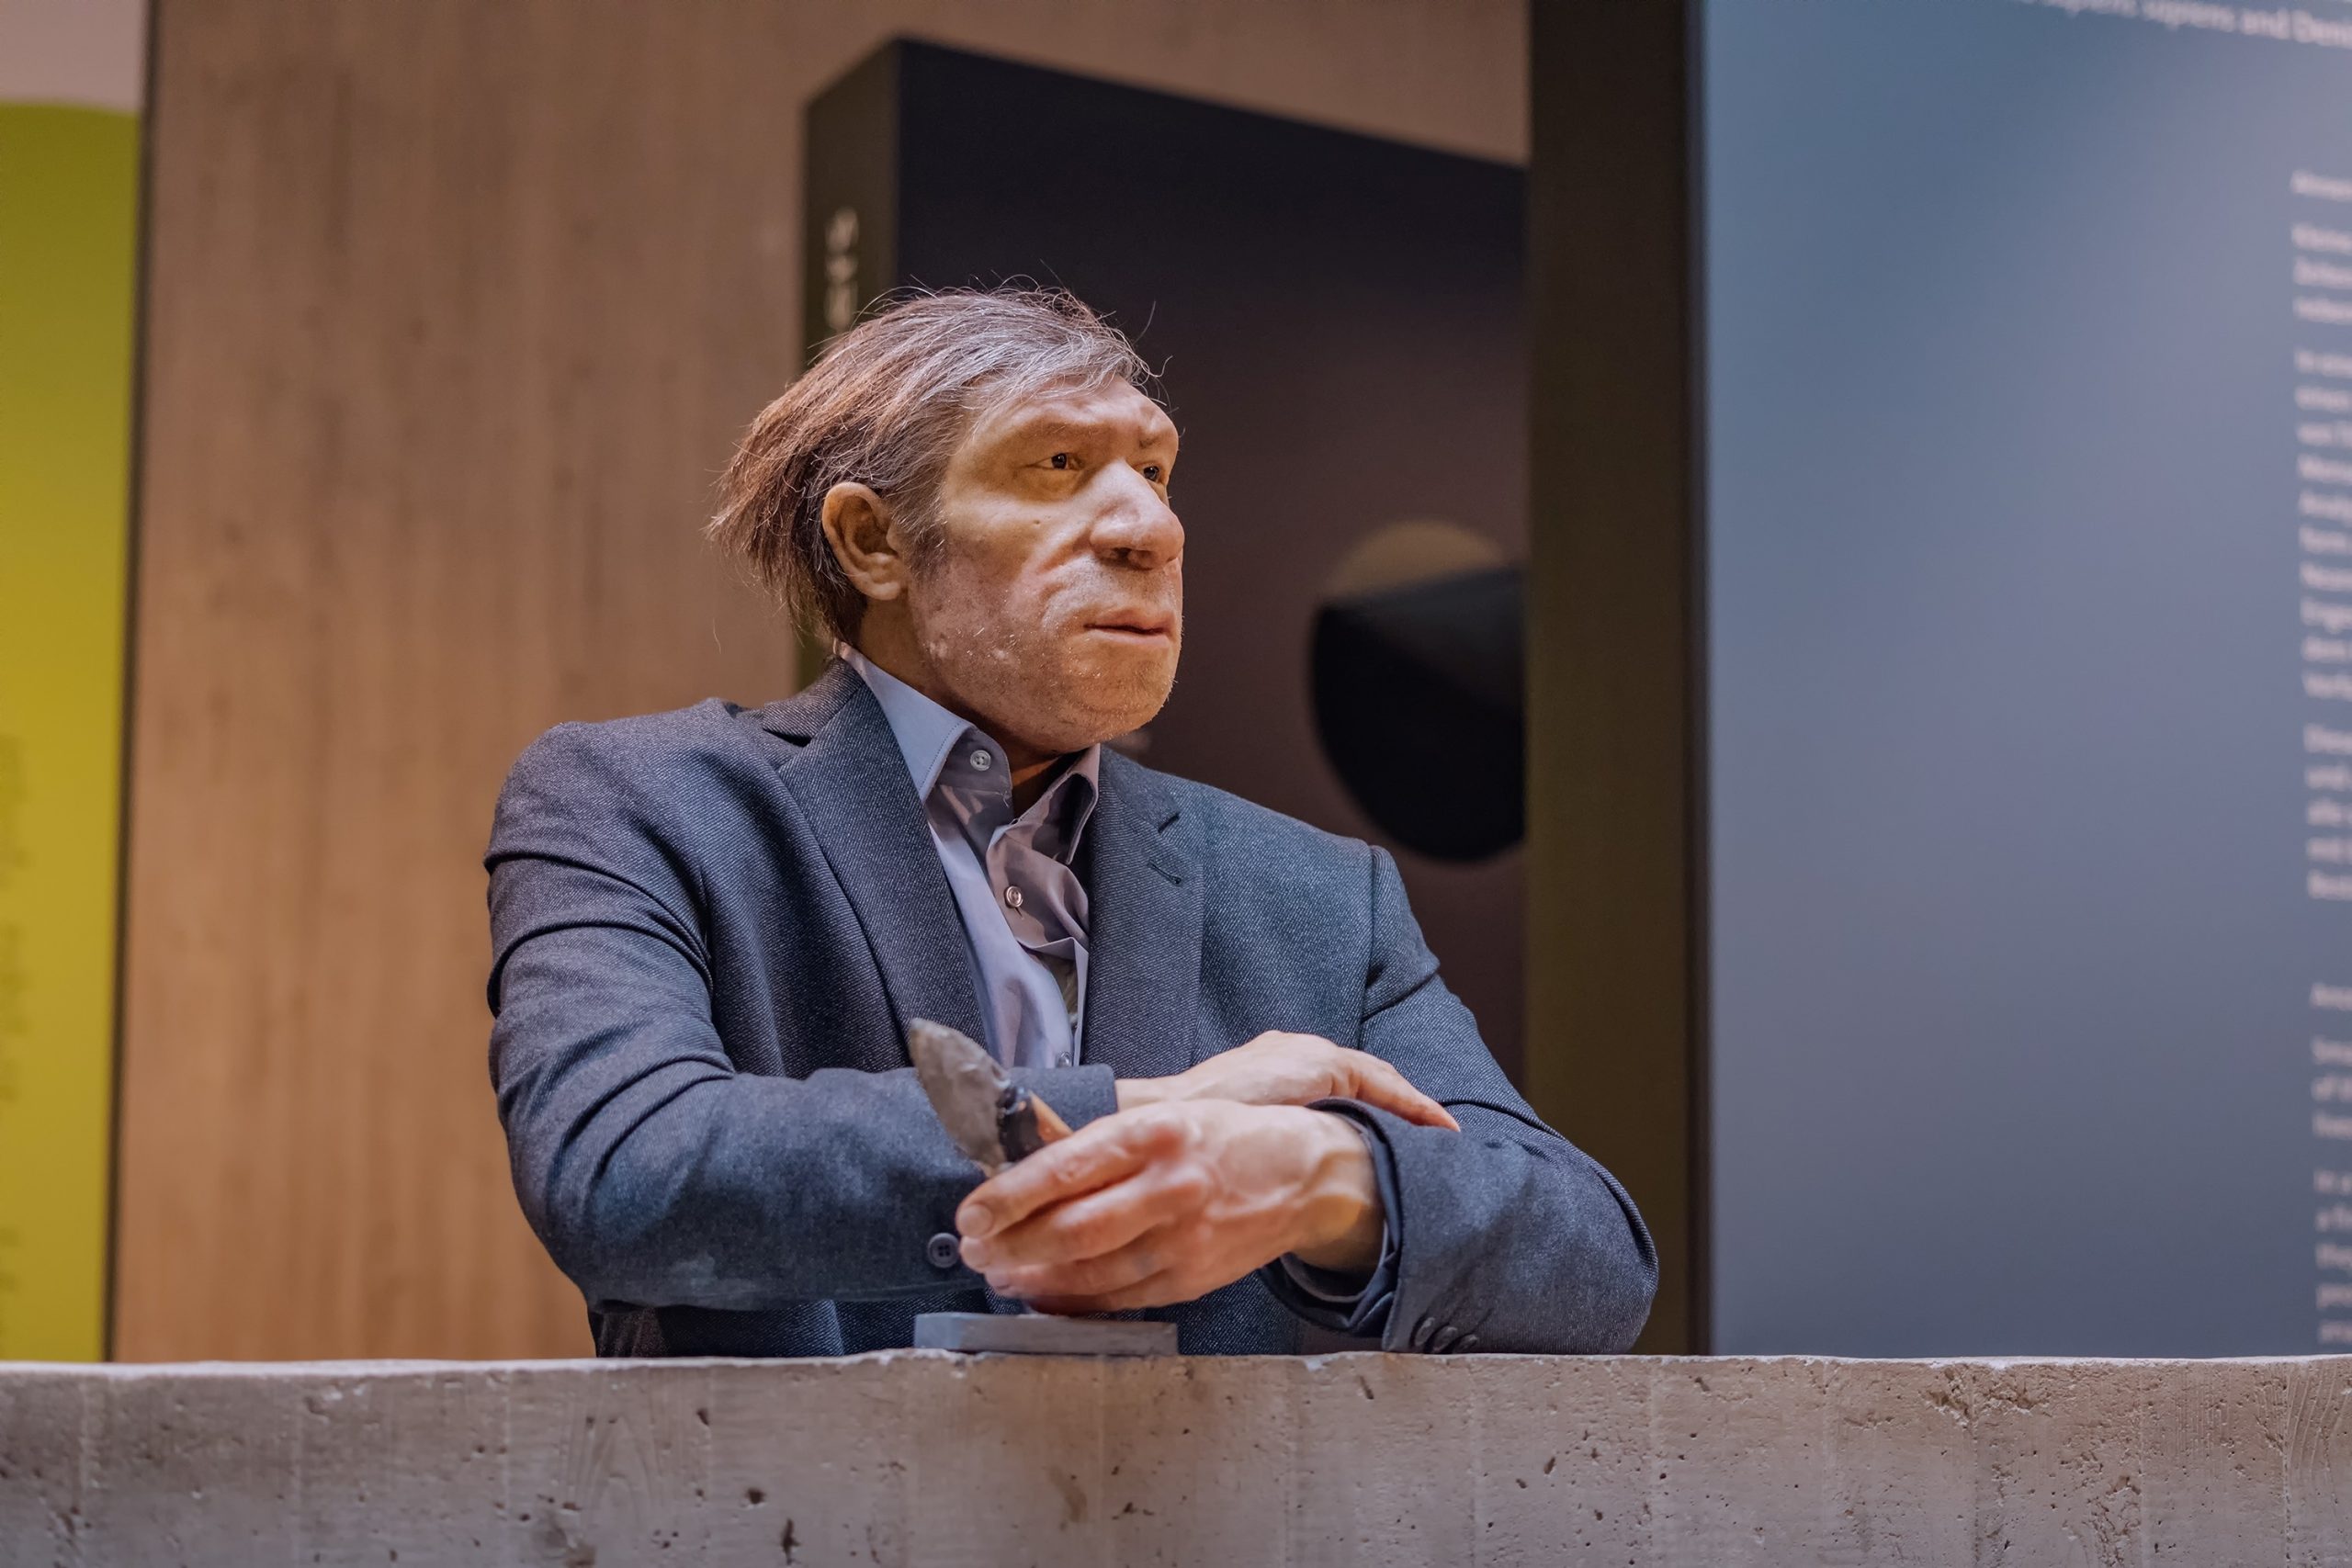 Are You a Morning Person? You Might Want to Thank Your Neanderthal Genes